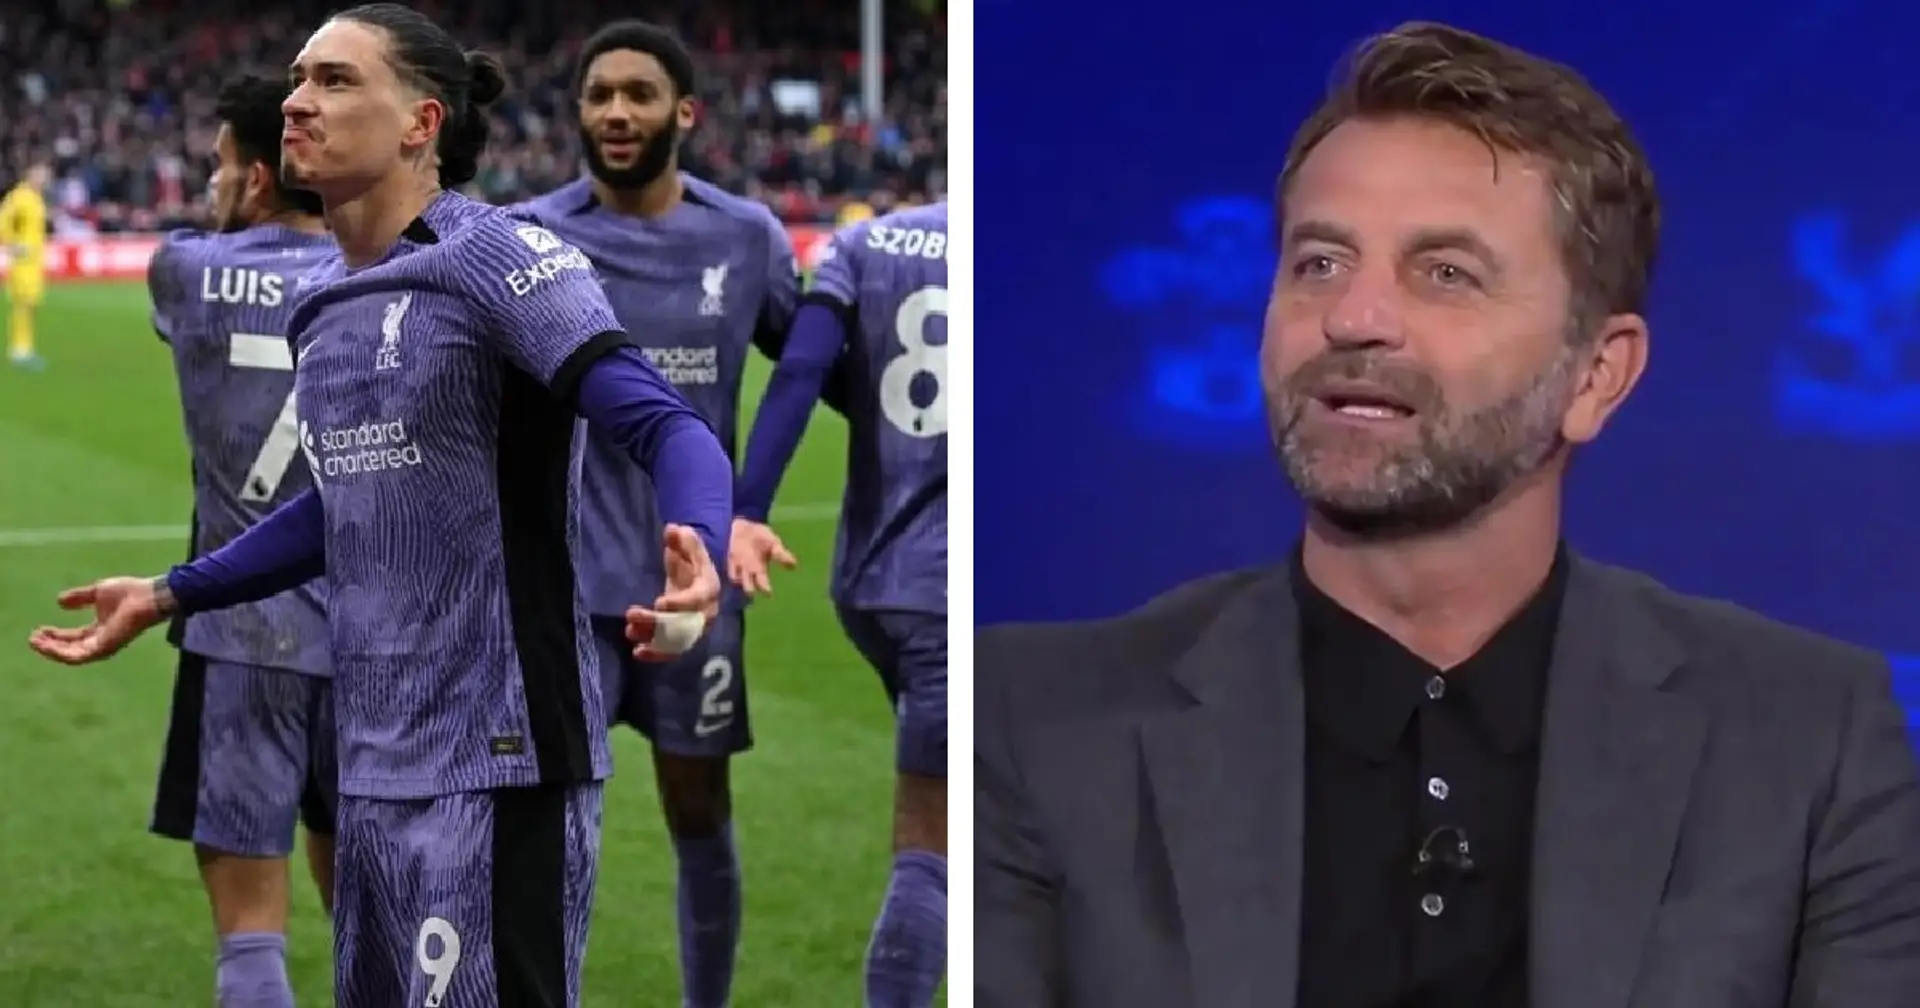 'The vision needs to be correct': Sherwood says one Liverpool player 'isn't great with the ball'